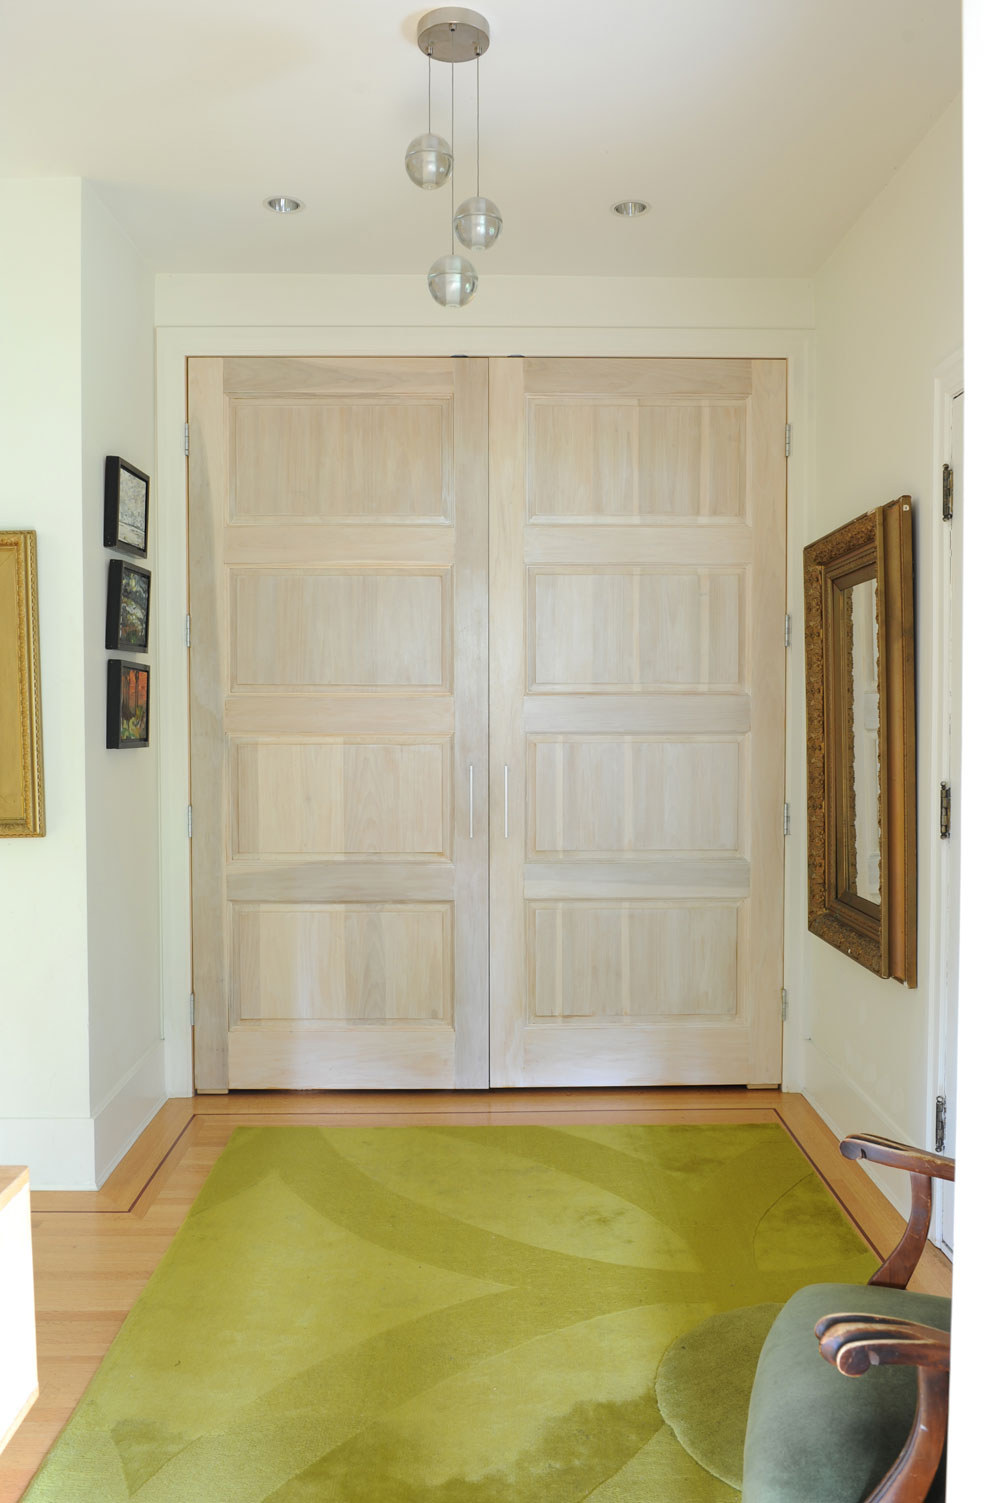 Double white oak panelled doors in front of green rug